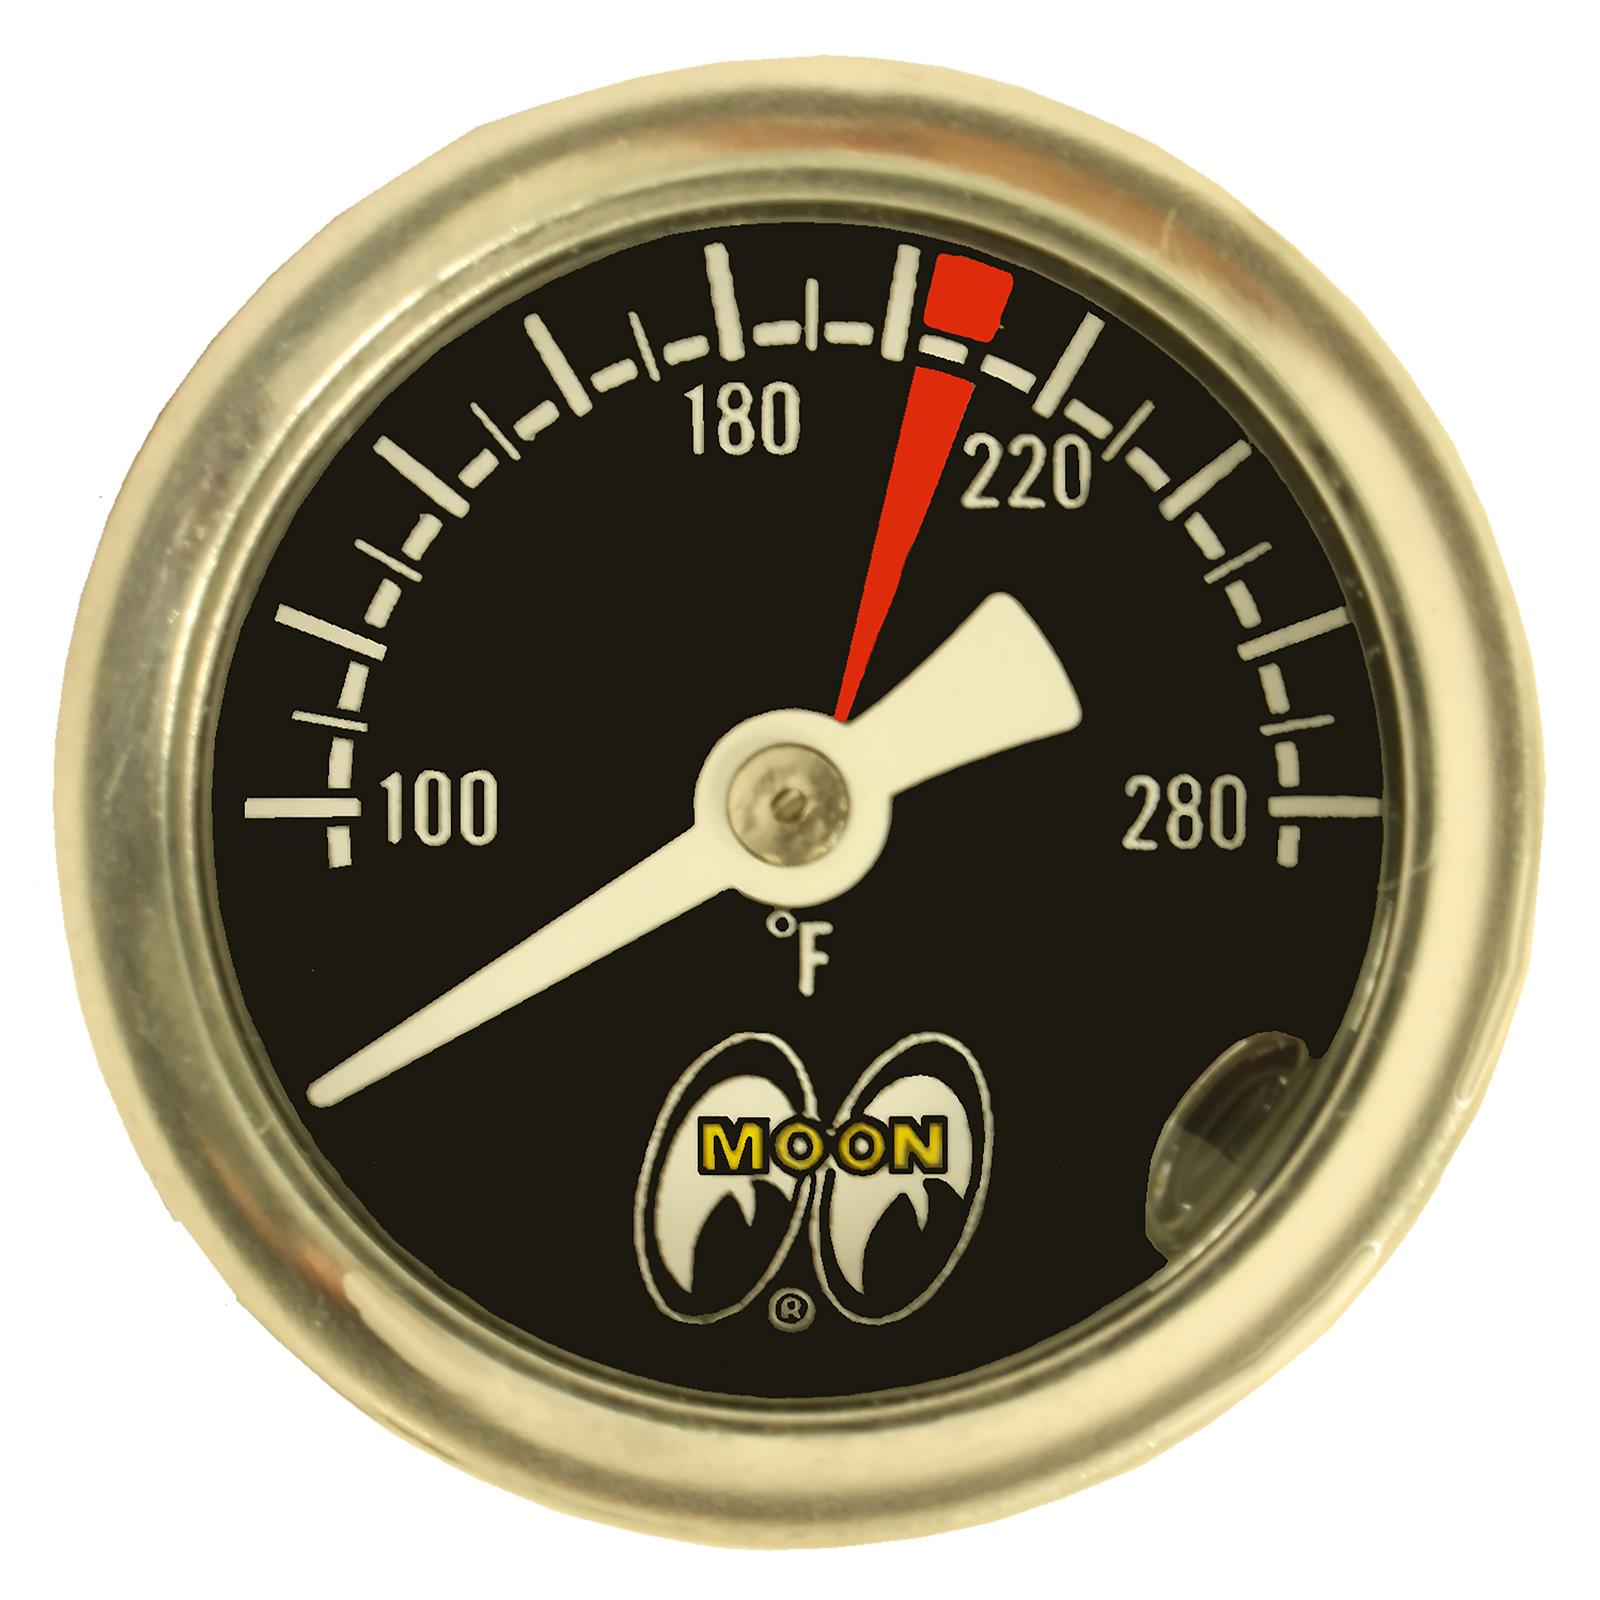 Wag-Aero 2-1/8 Outside Air Temperature Gauge - Outside Air Temp. Gauges -  INSTRUMENTS